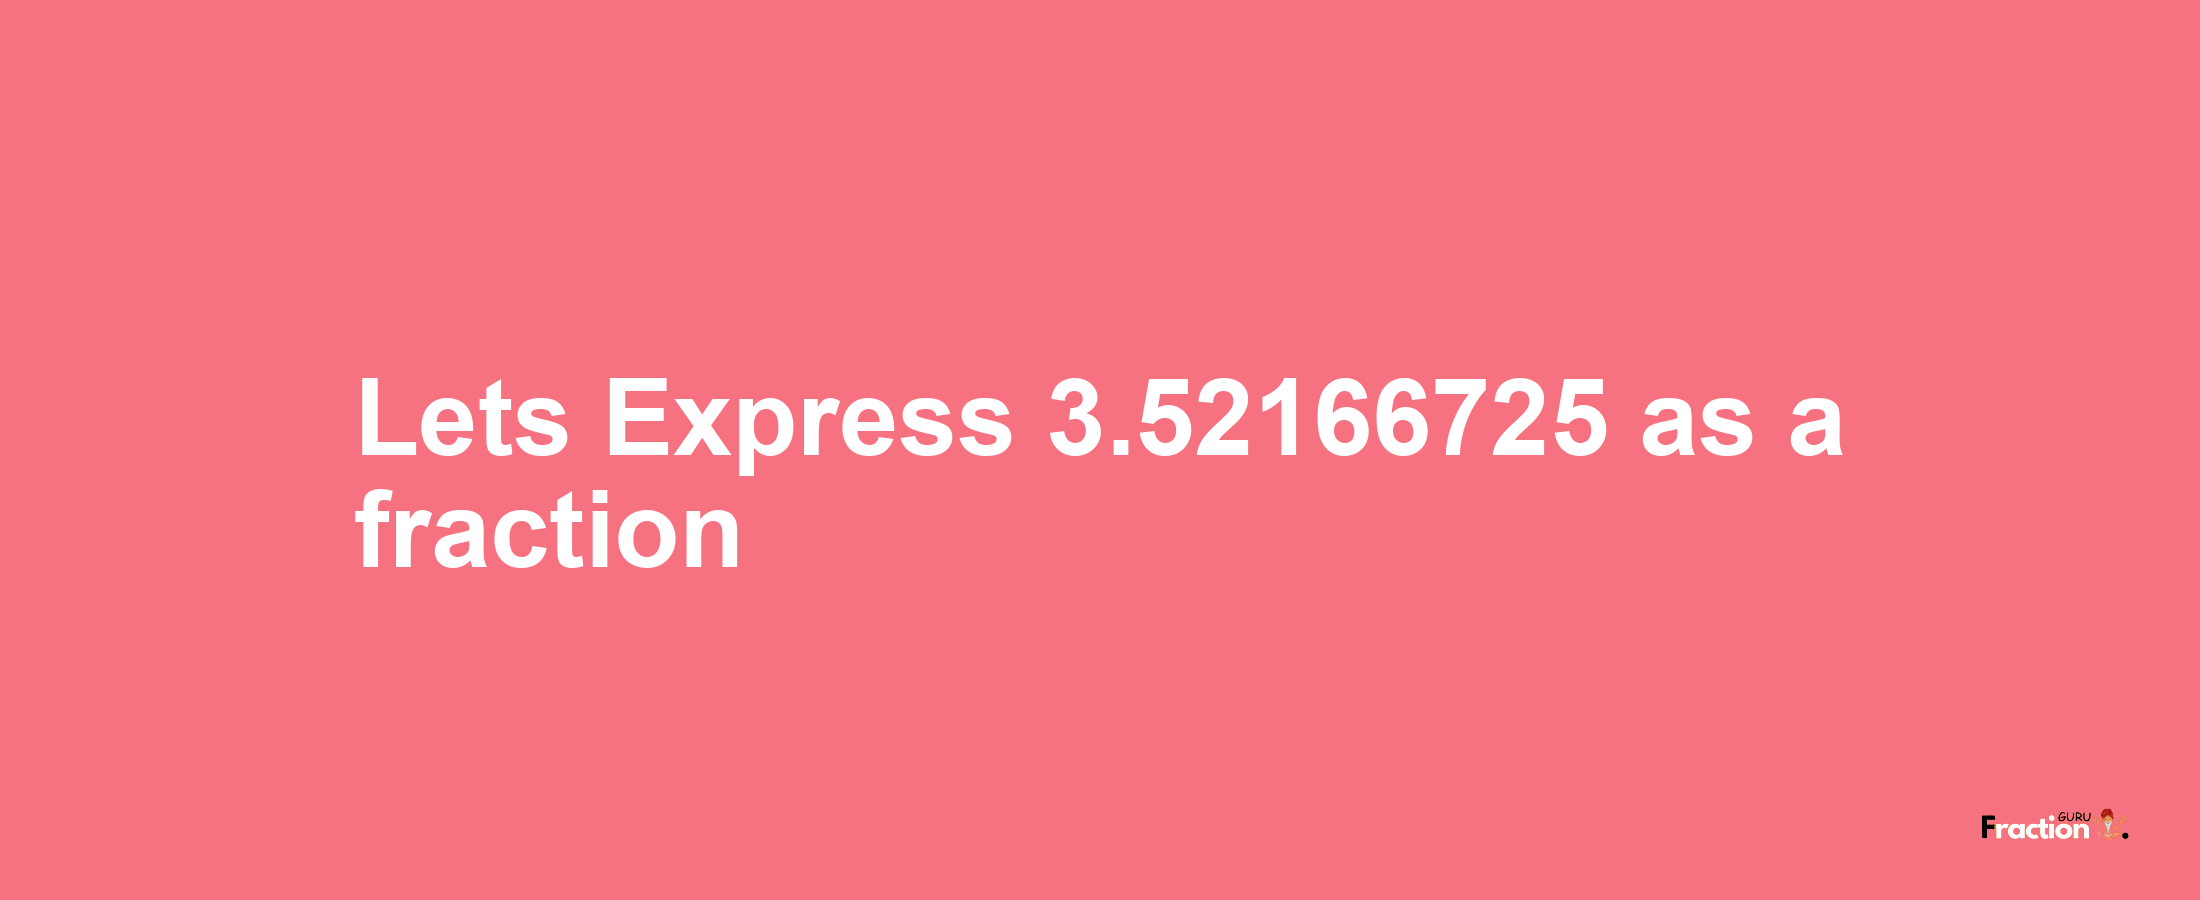 Lets Express 3.52166725 as afraction